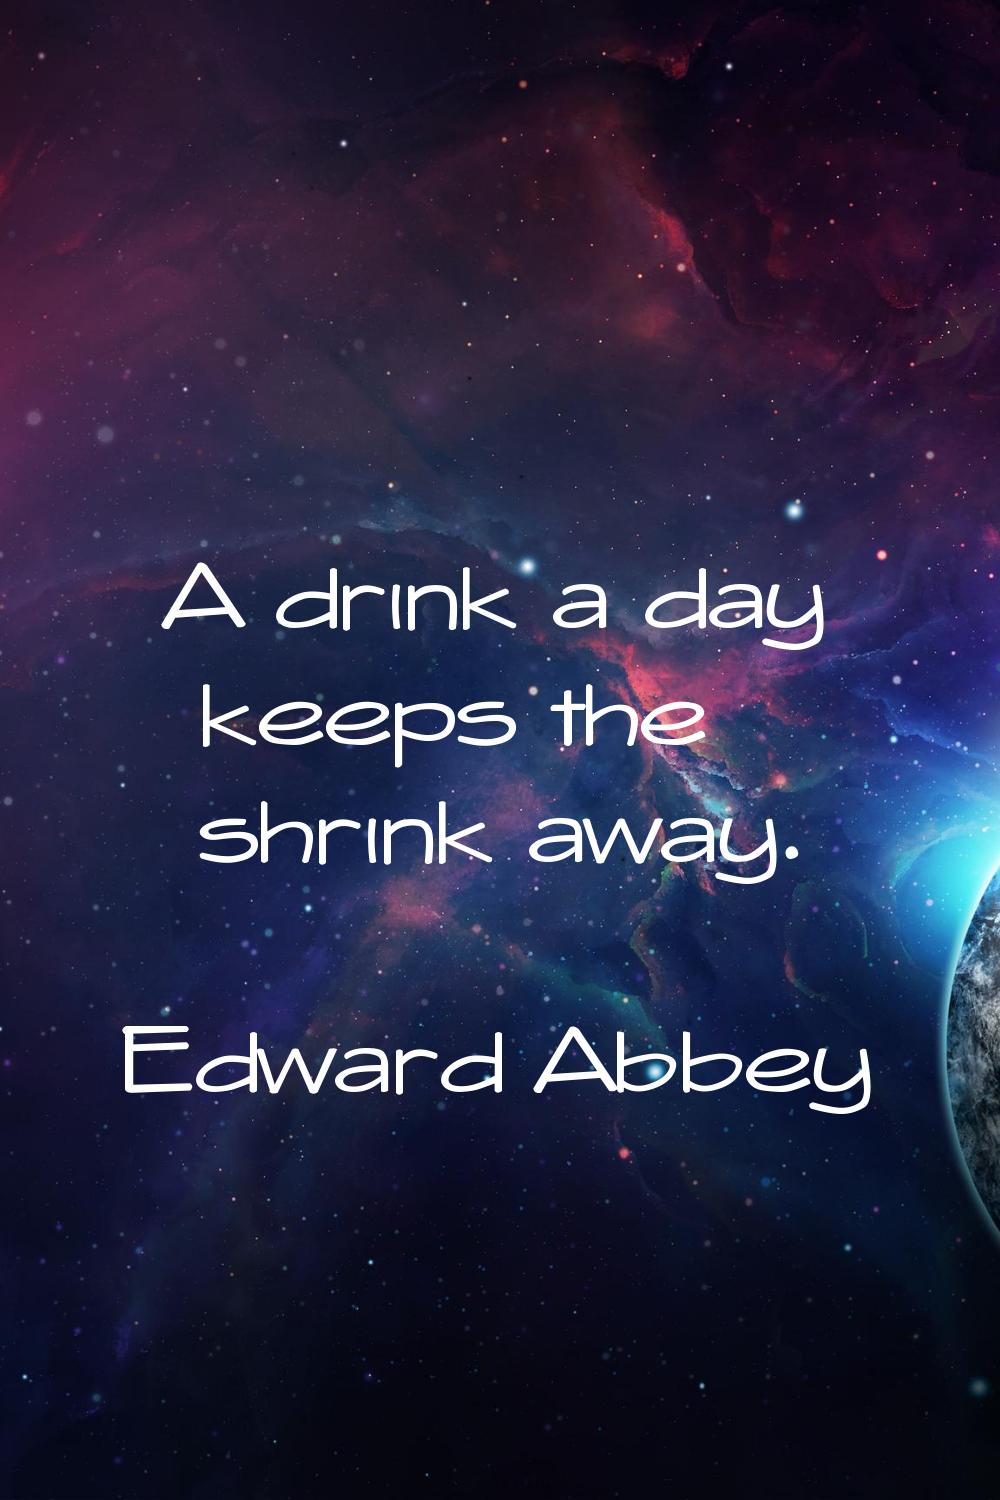 A drink a day keeps the shrink away.